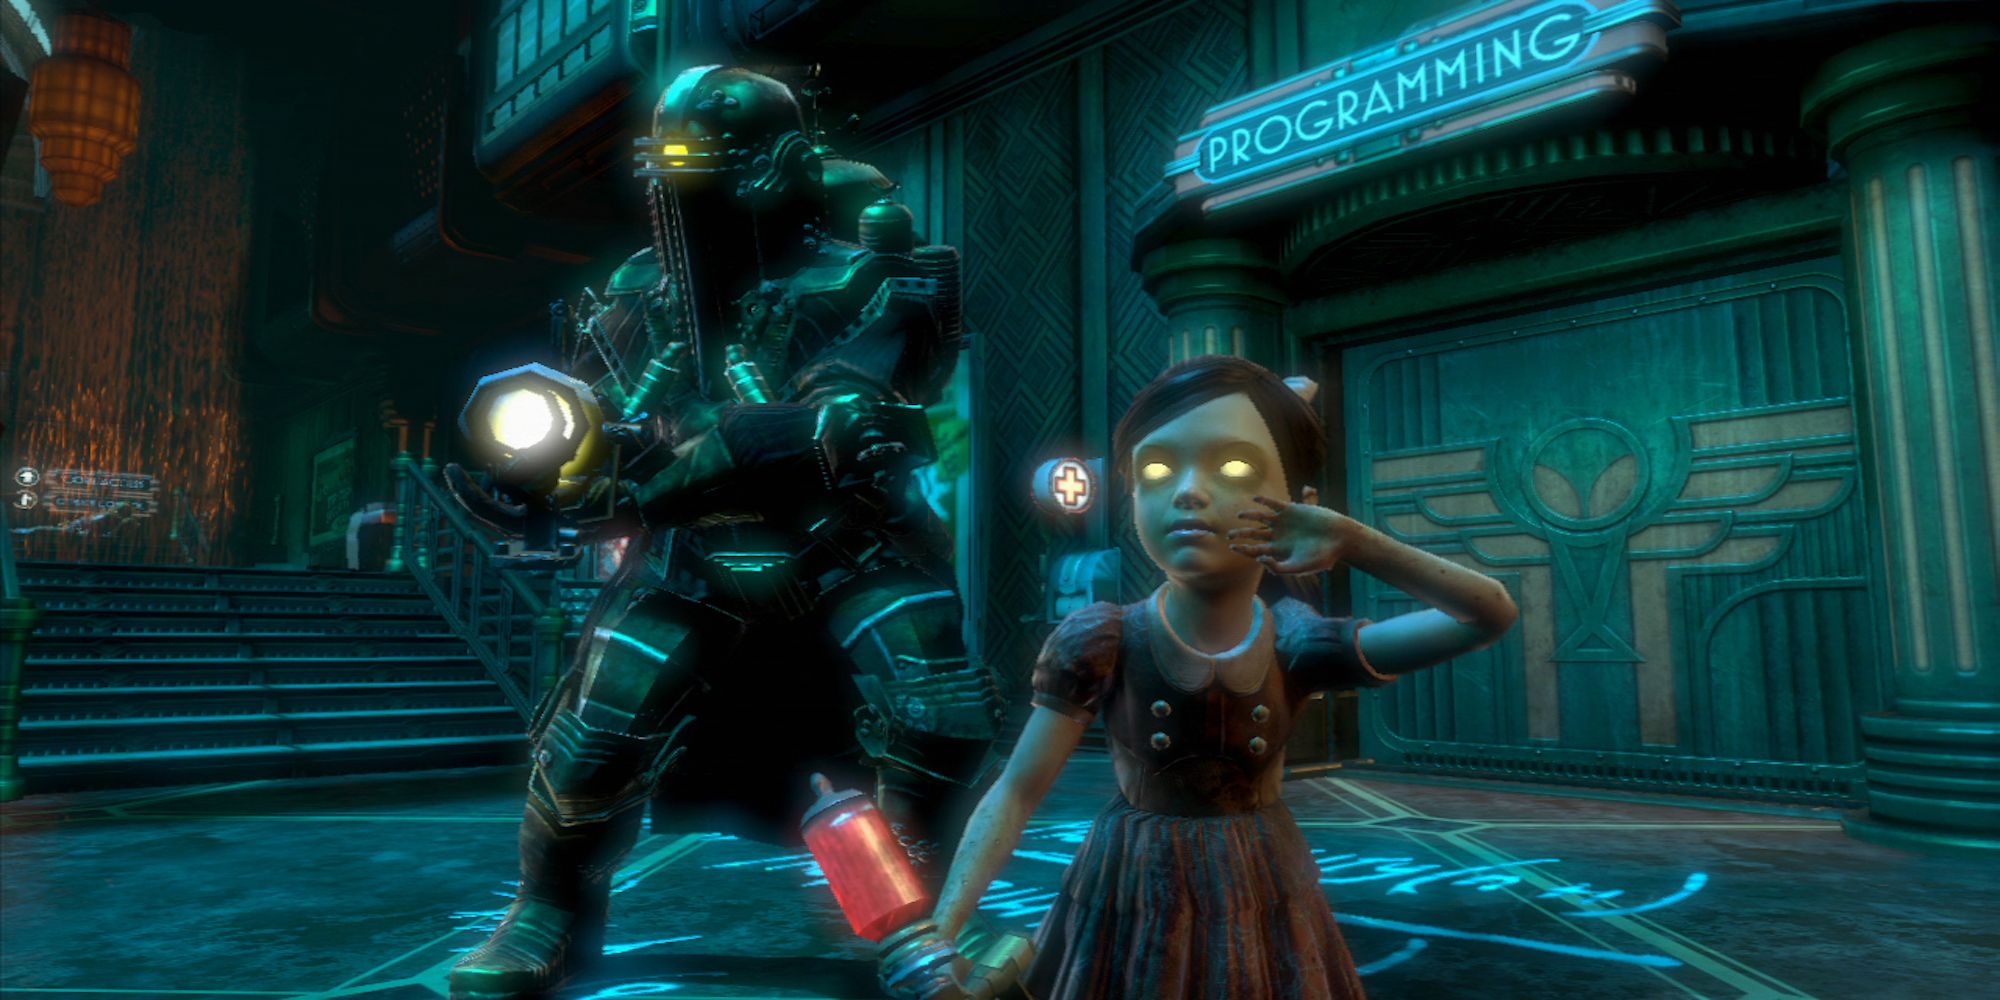 Subject Sigma and Little Sister stand in Minerva's Den in BioShock 2